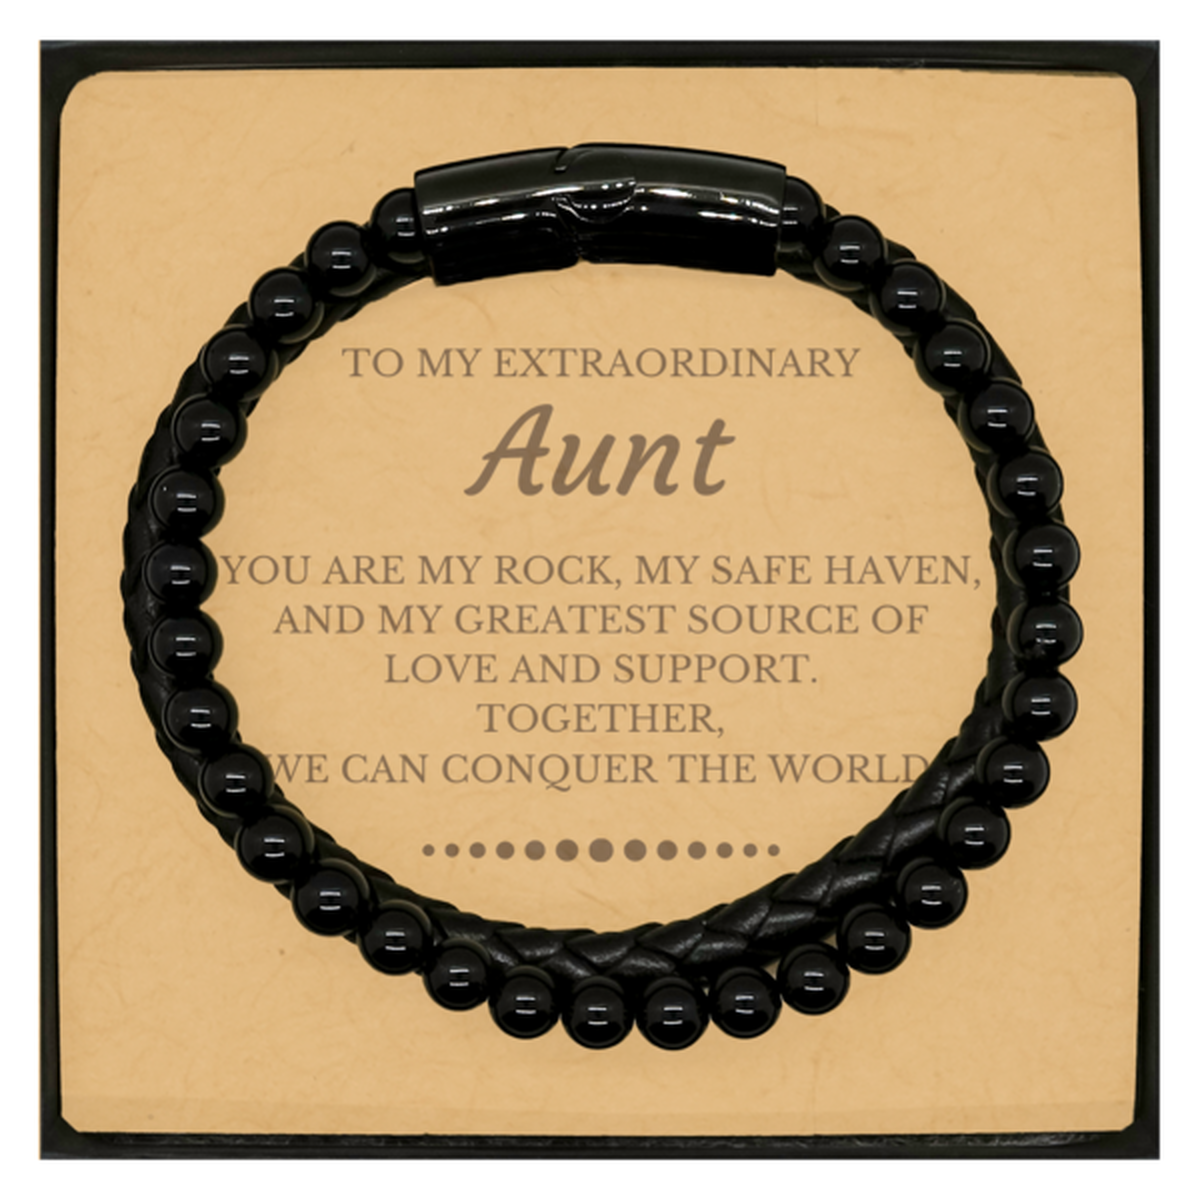 To My Extraordinary Aunt Gifts, Together, we can conquer the world, Birthday Christmas Stone Leather Bracelets For Aunt, Christmas Gifts For Aunt